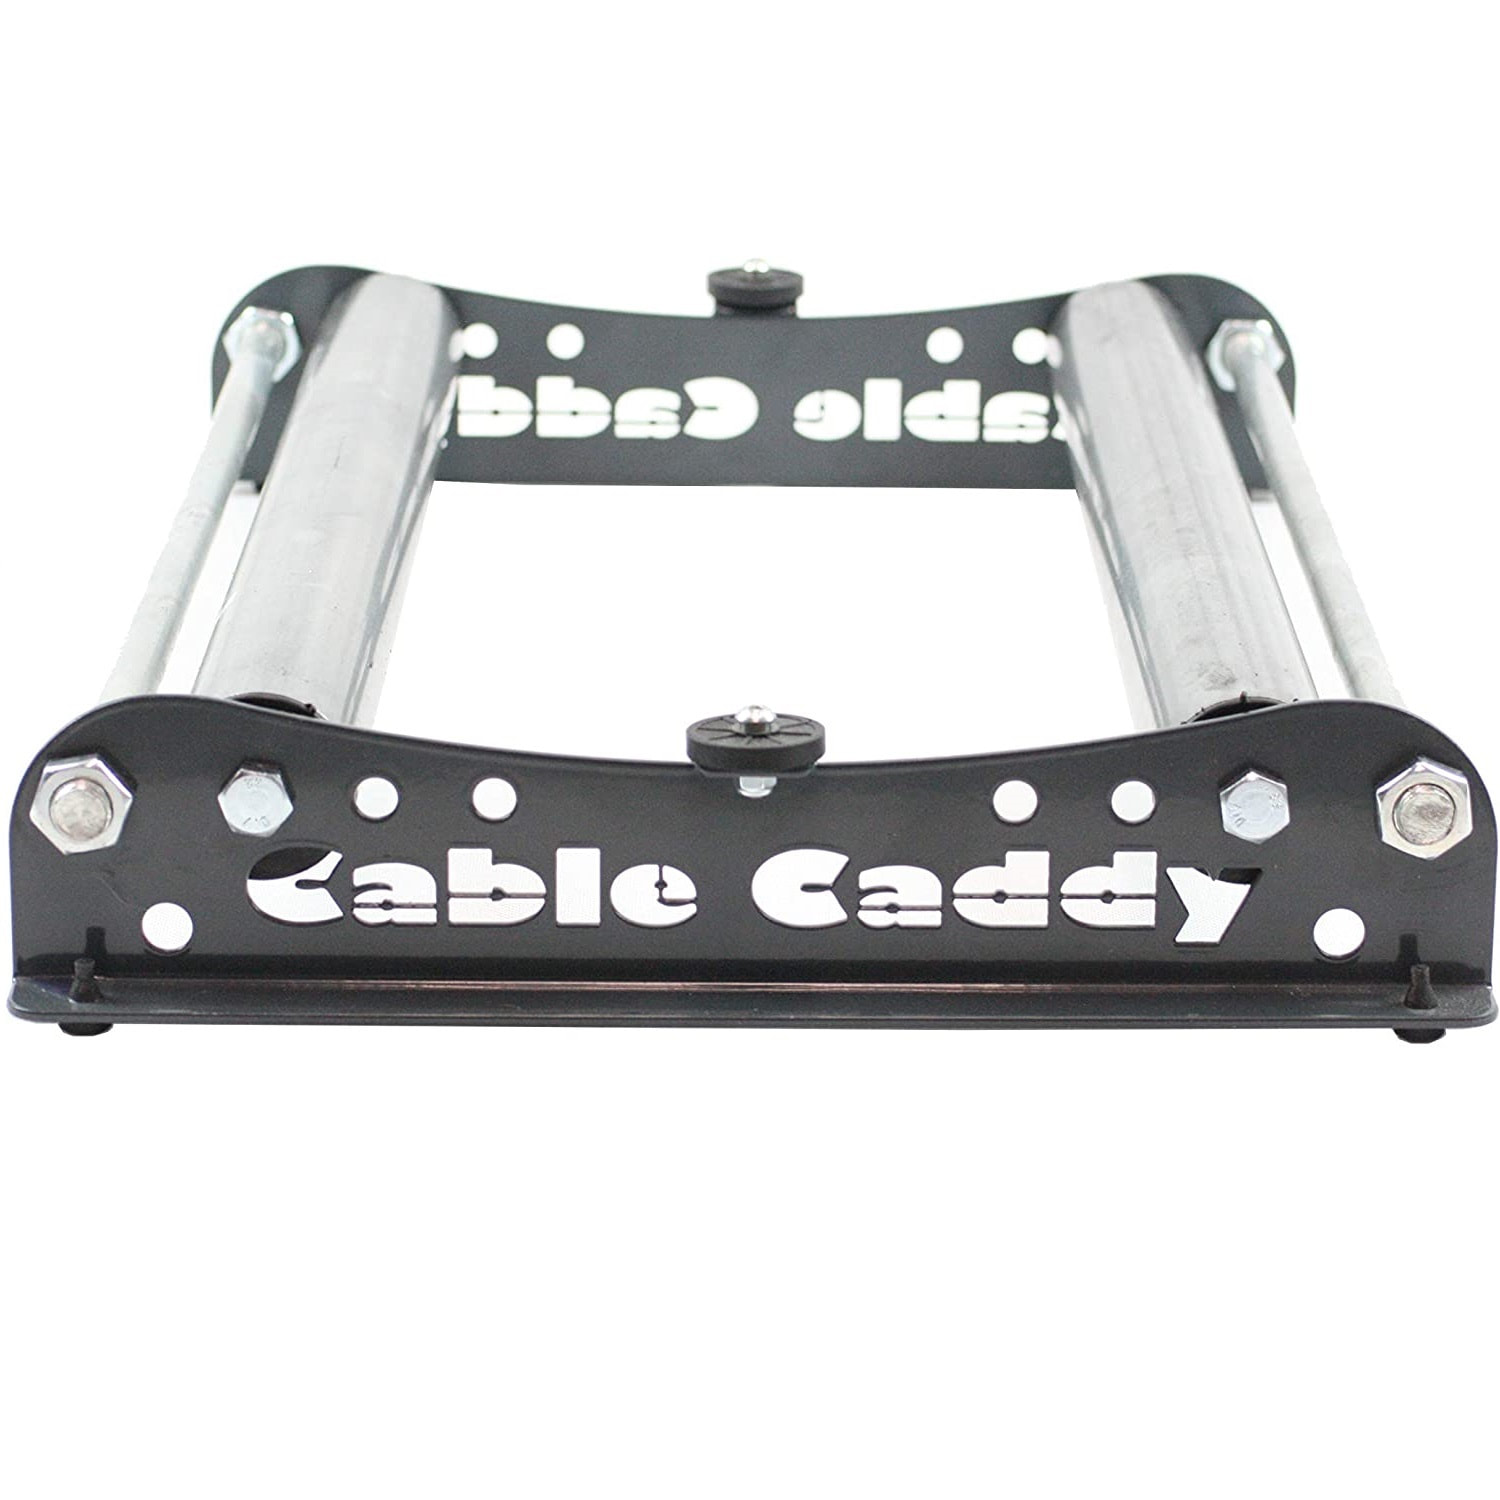 Cable Caddy 510 Silver